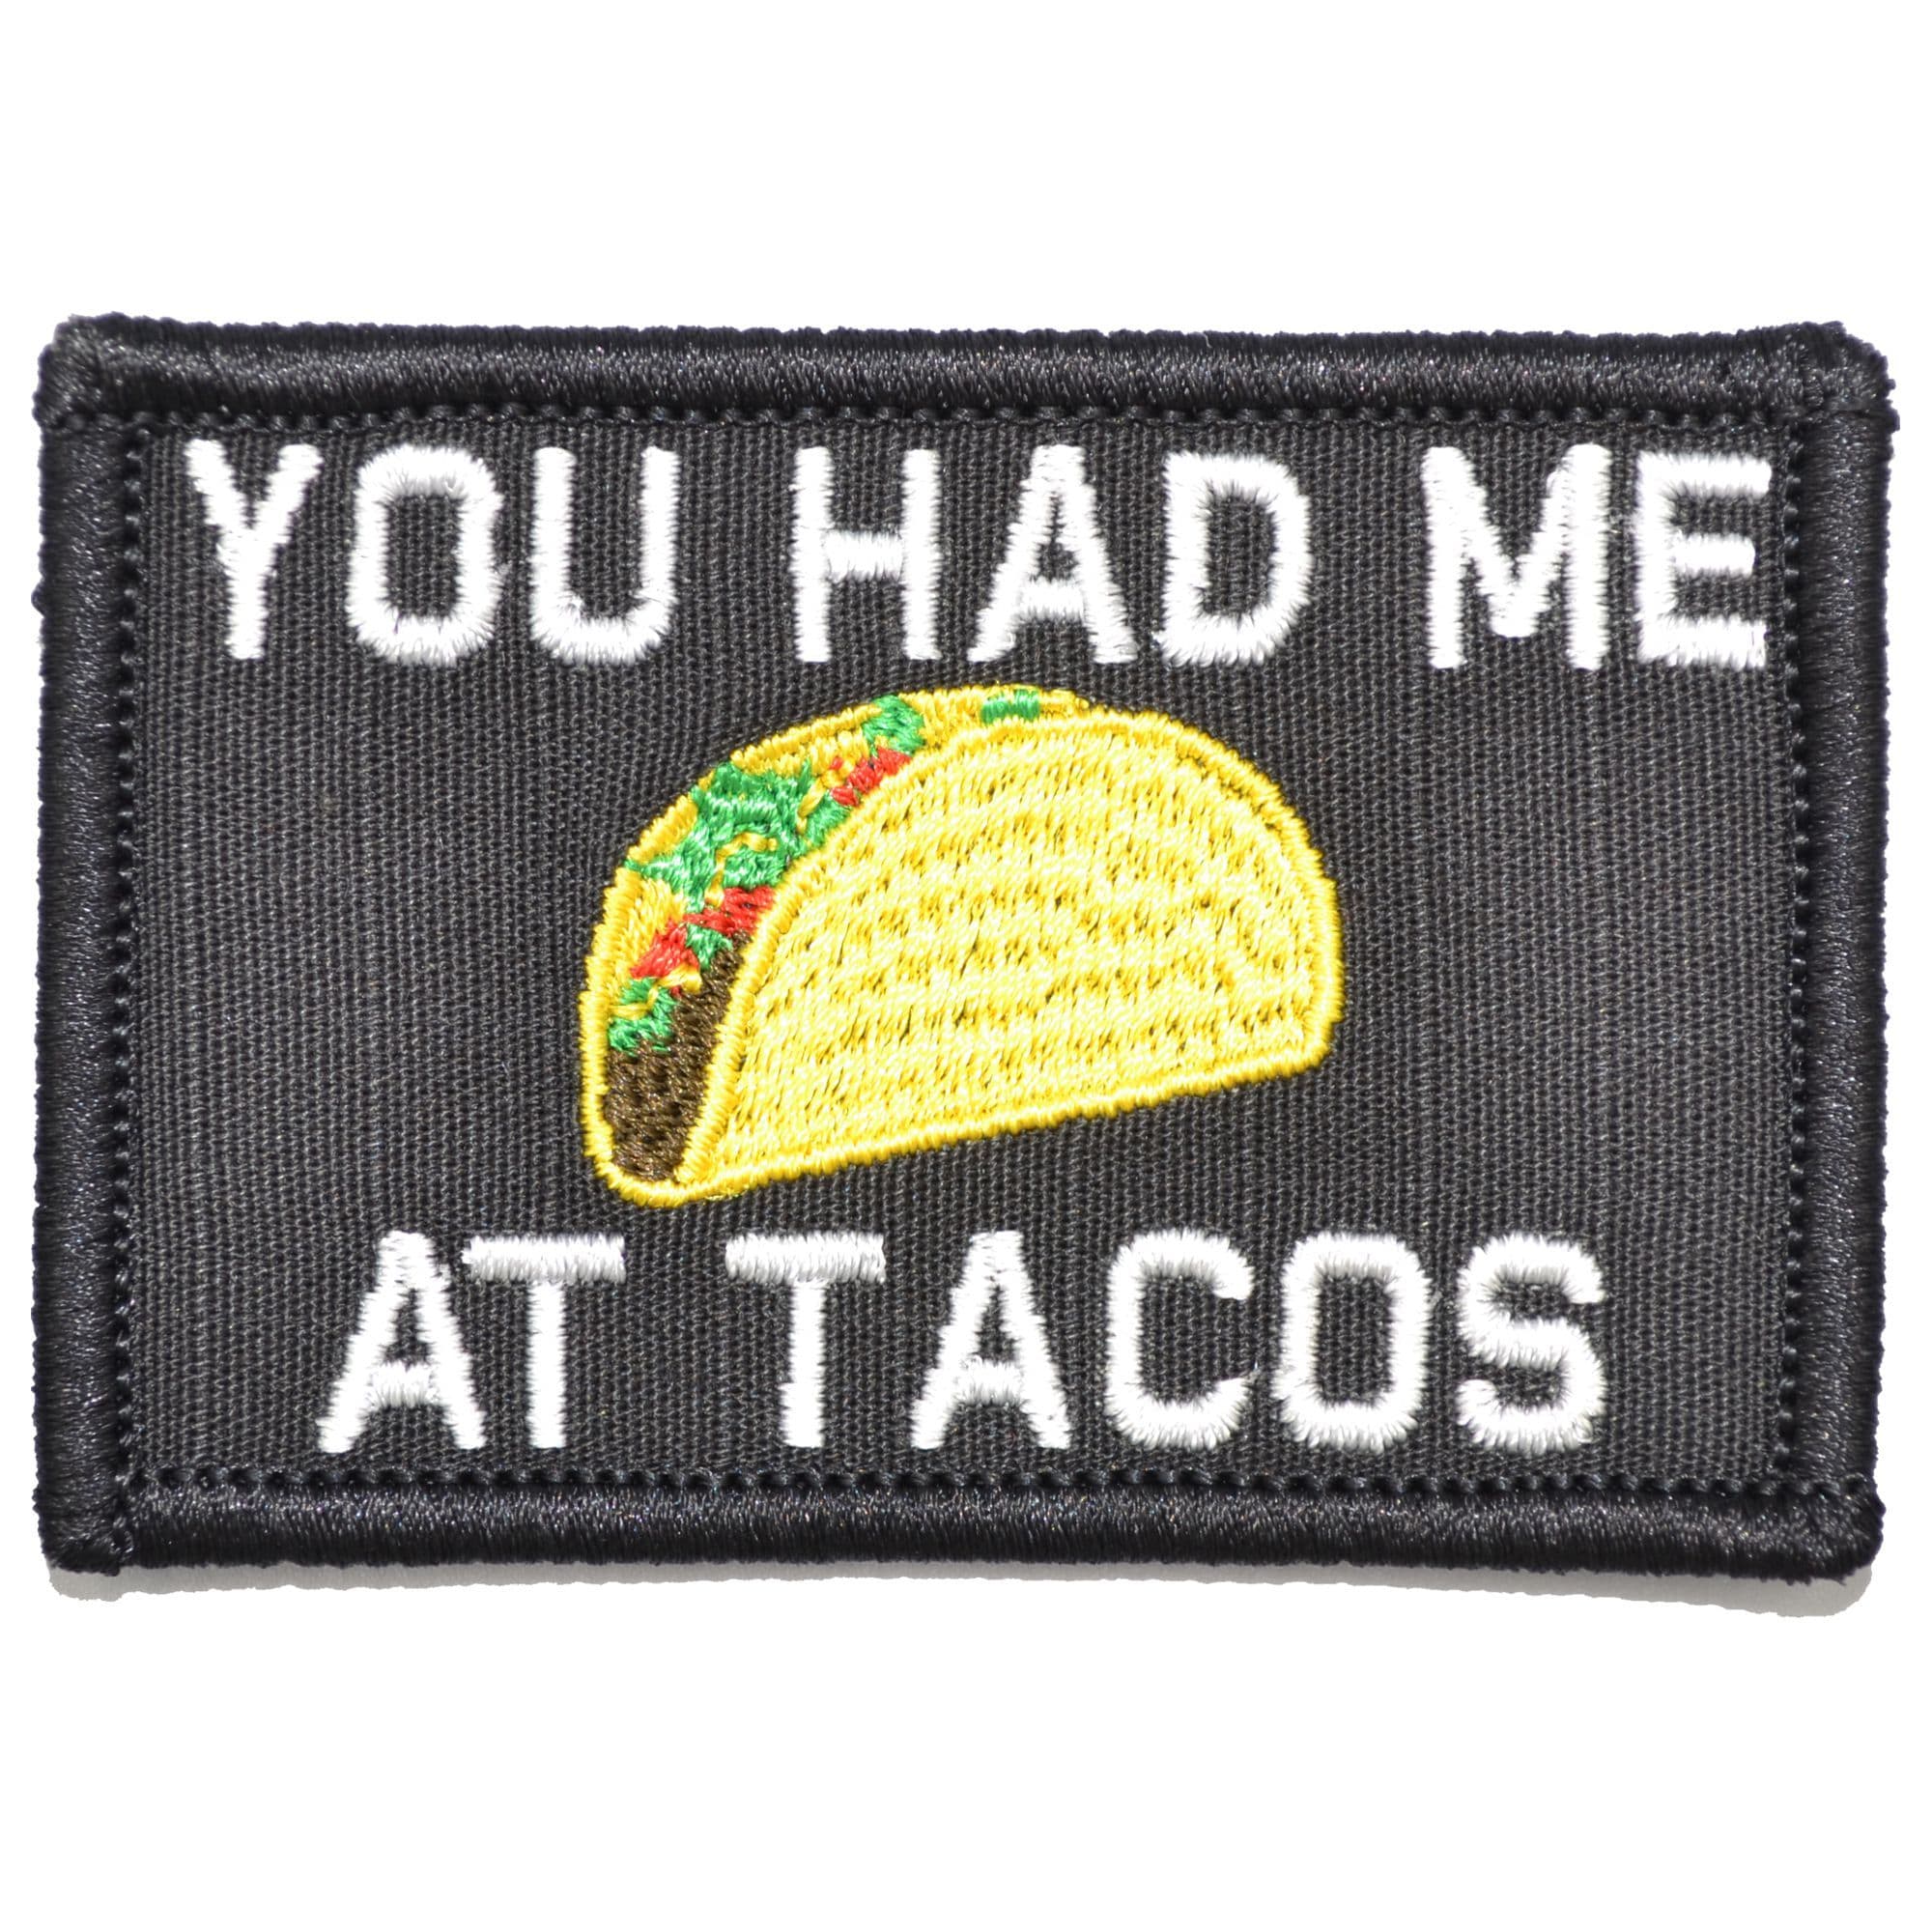 Tactical Gear Junkie Patches Black You Had Me At Tacos - 2x3 Patch